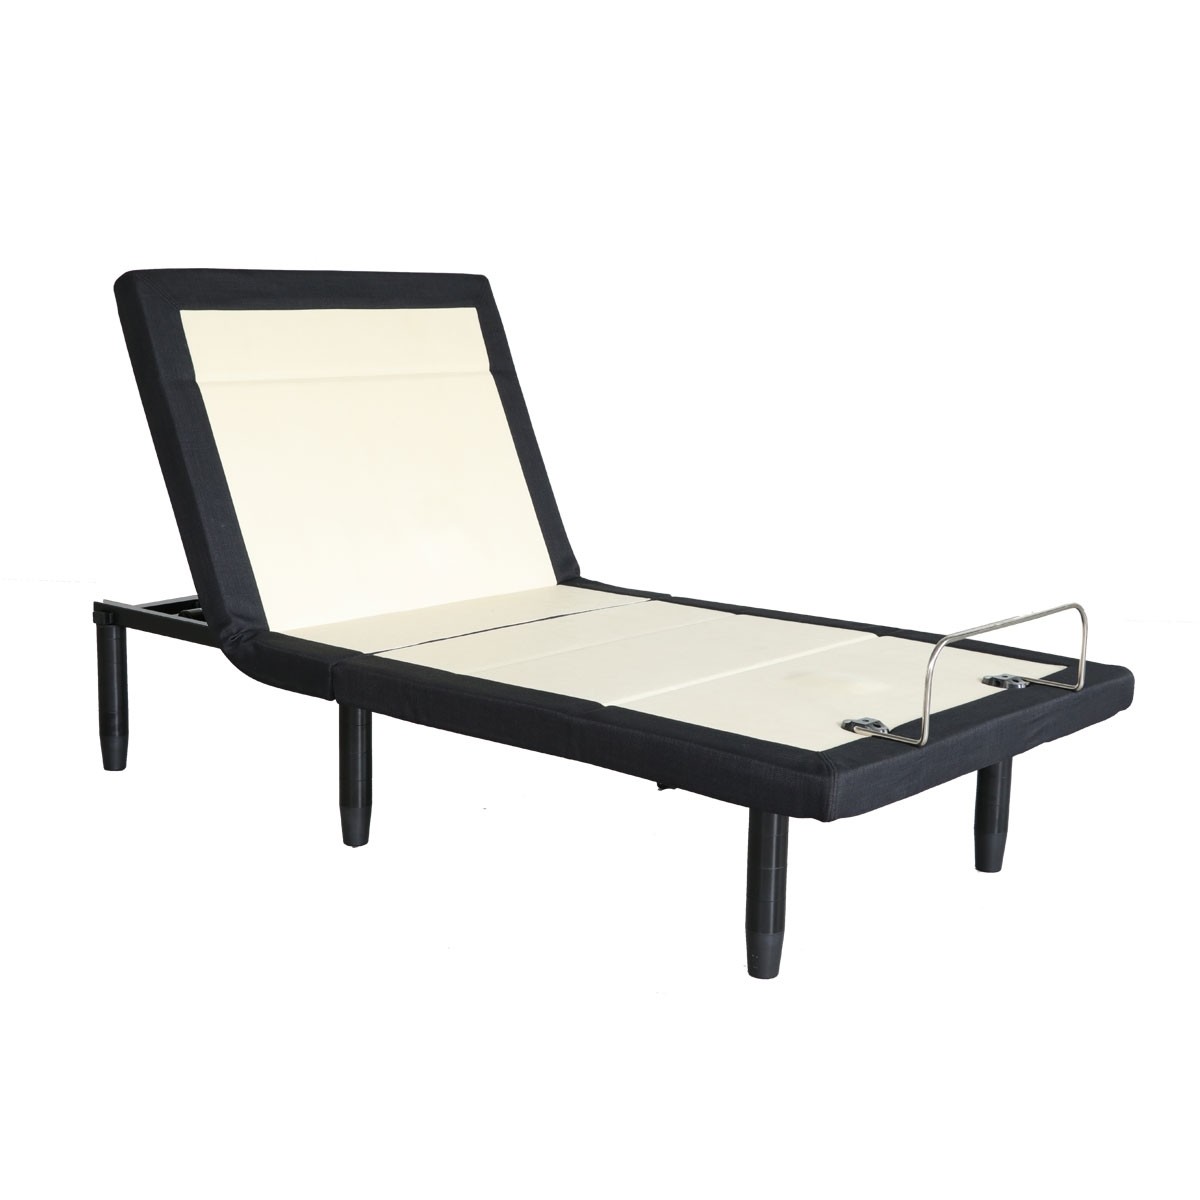 PROFEXIONAL Adjustable Electric Bed (UPS1530-TXL 38*80 In)